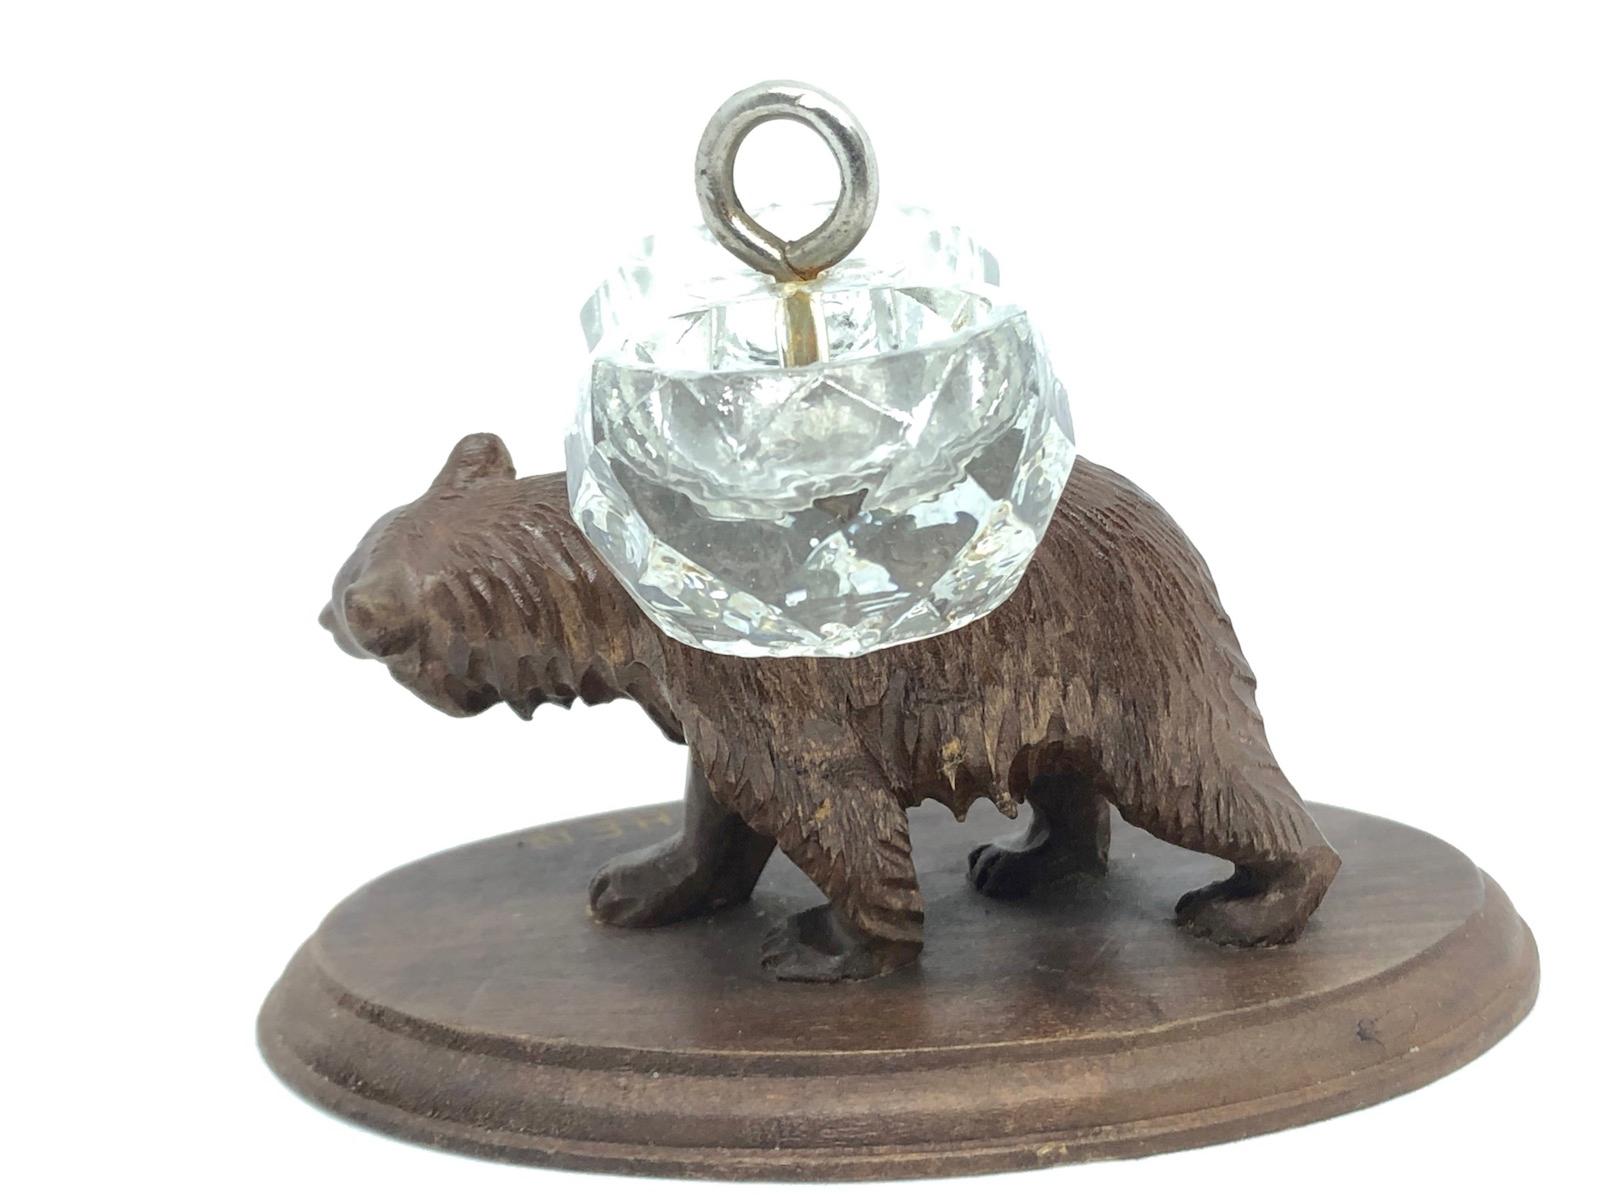 Classic early 1900s Black Forest Brienz wood carved salt or spice cellar in form of an bear. Nice addition to your room or just for use on your table. Found at an estate sale in Vienna, Austria.